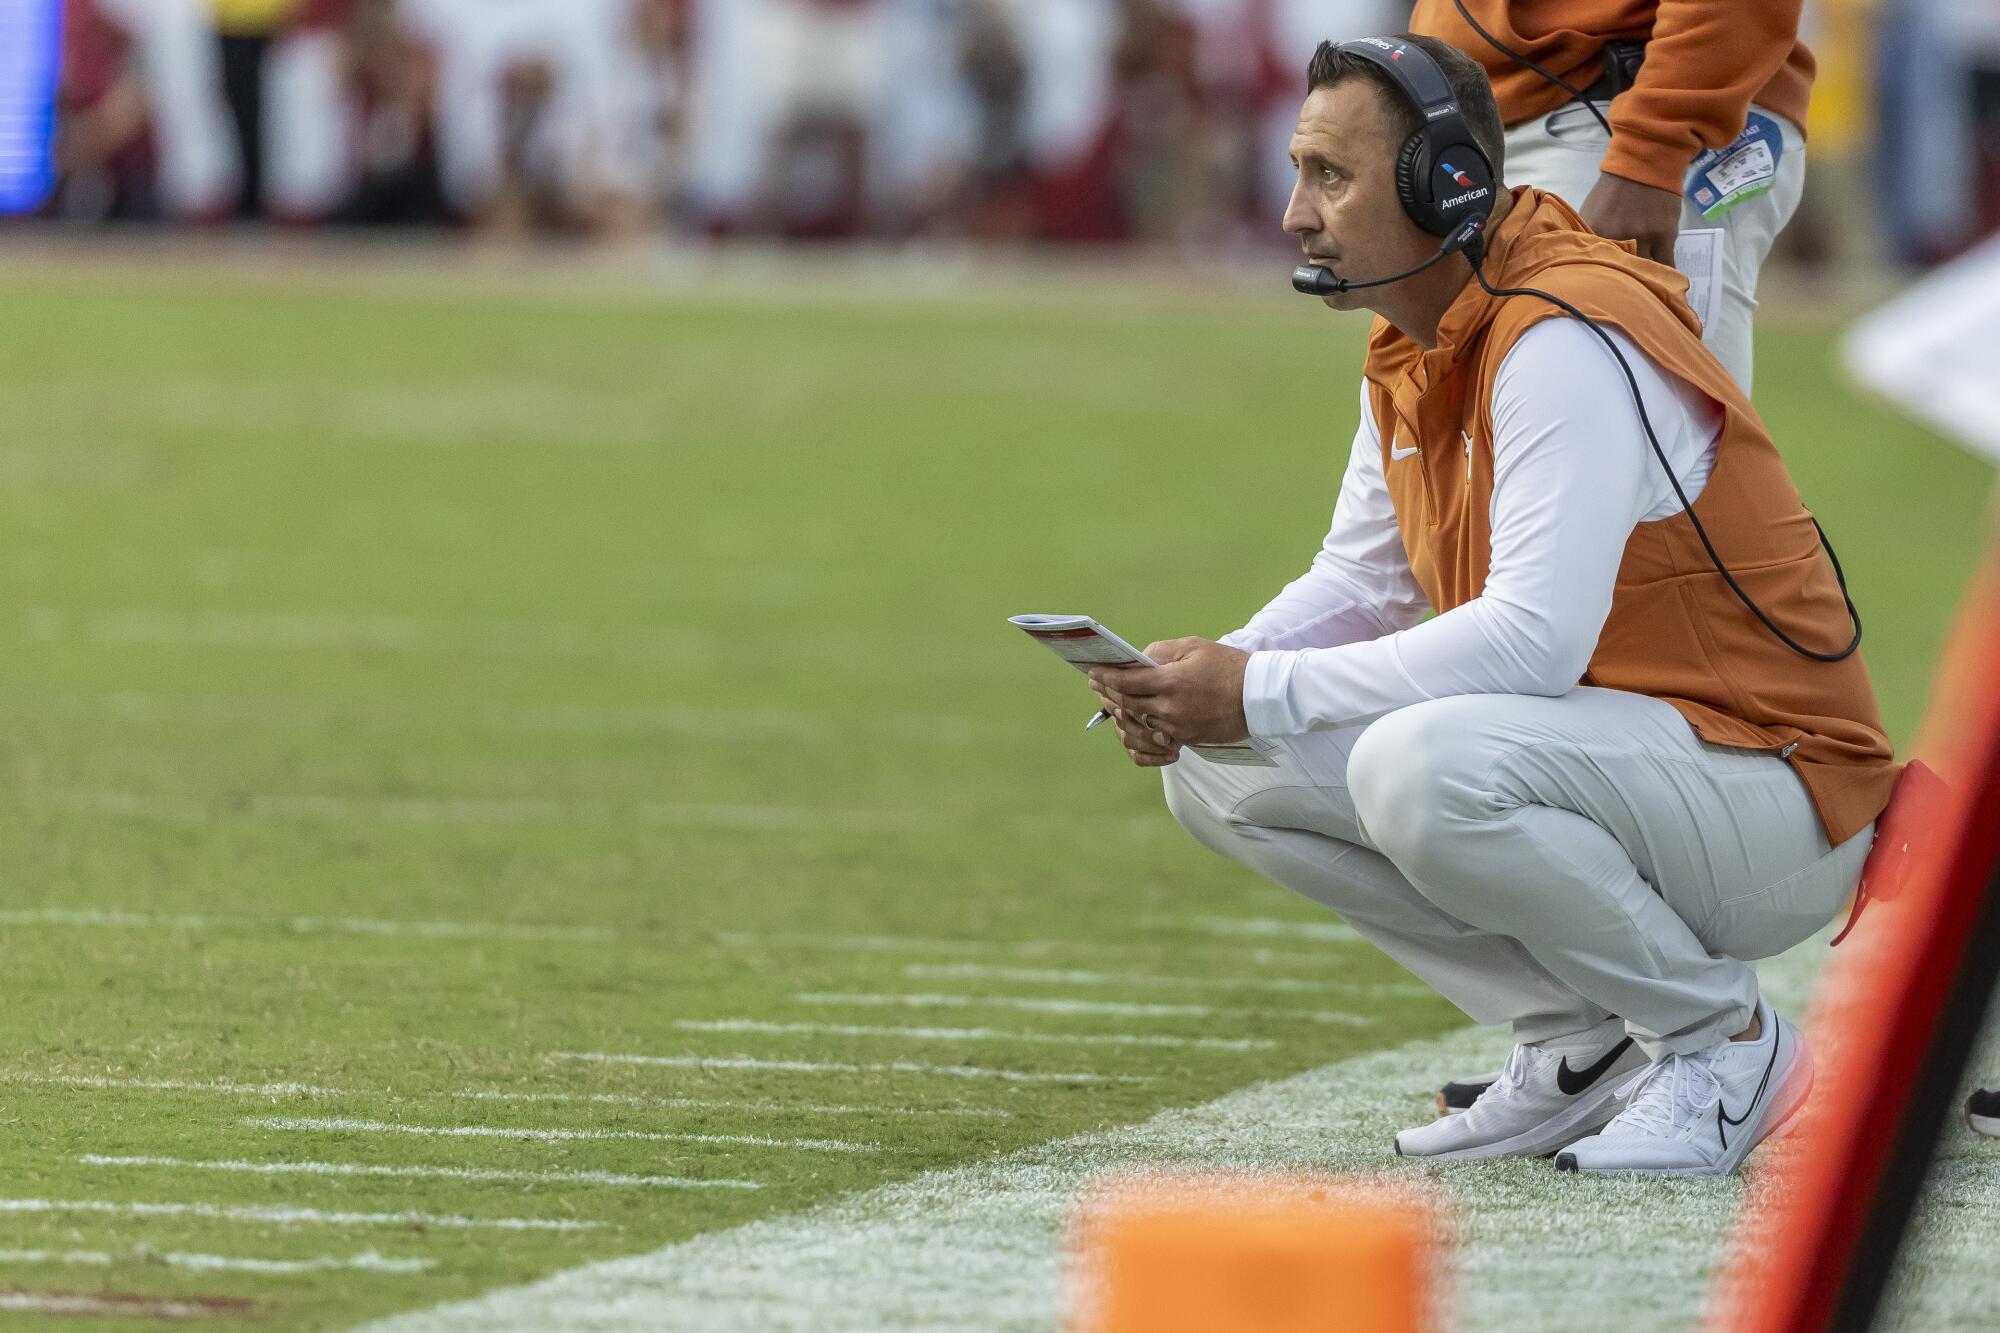 Texas coach Steve Sarkisian watches from the sideline during a win over Alabama on Saturday.